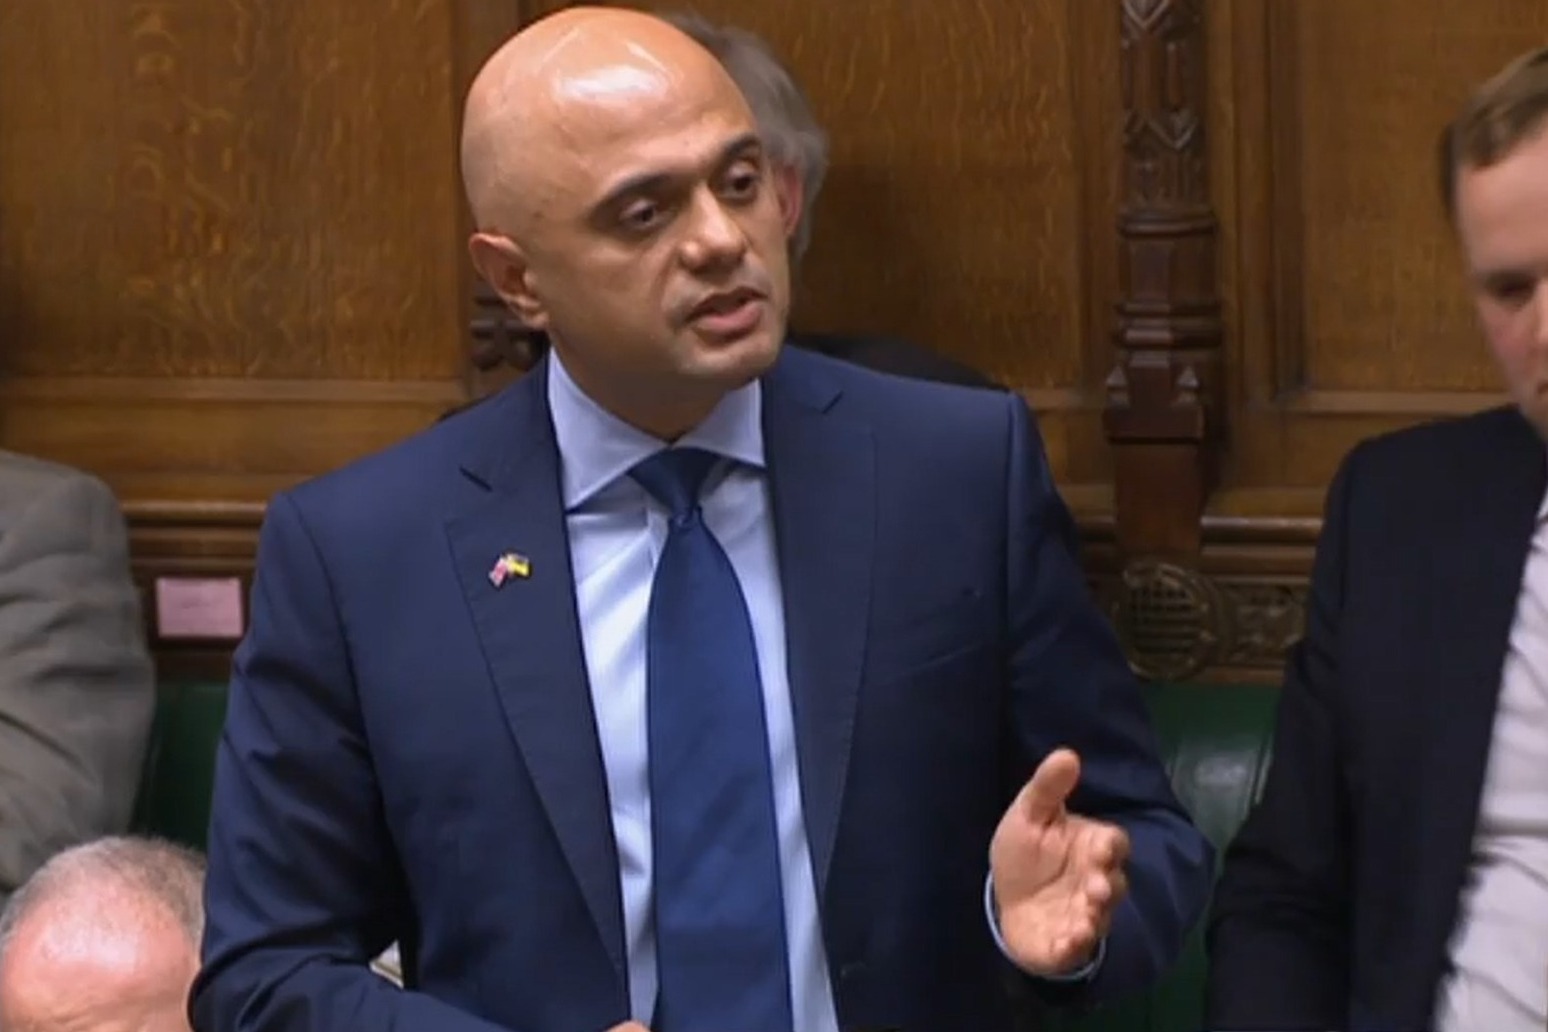 Javid insists he quit as ‘enough is enough’ and ‘something fundamentally wrong’ 